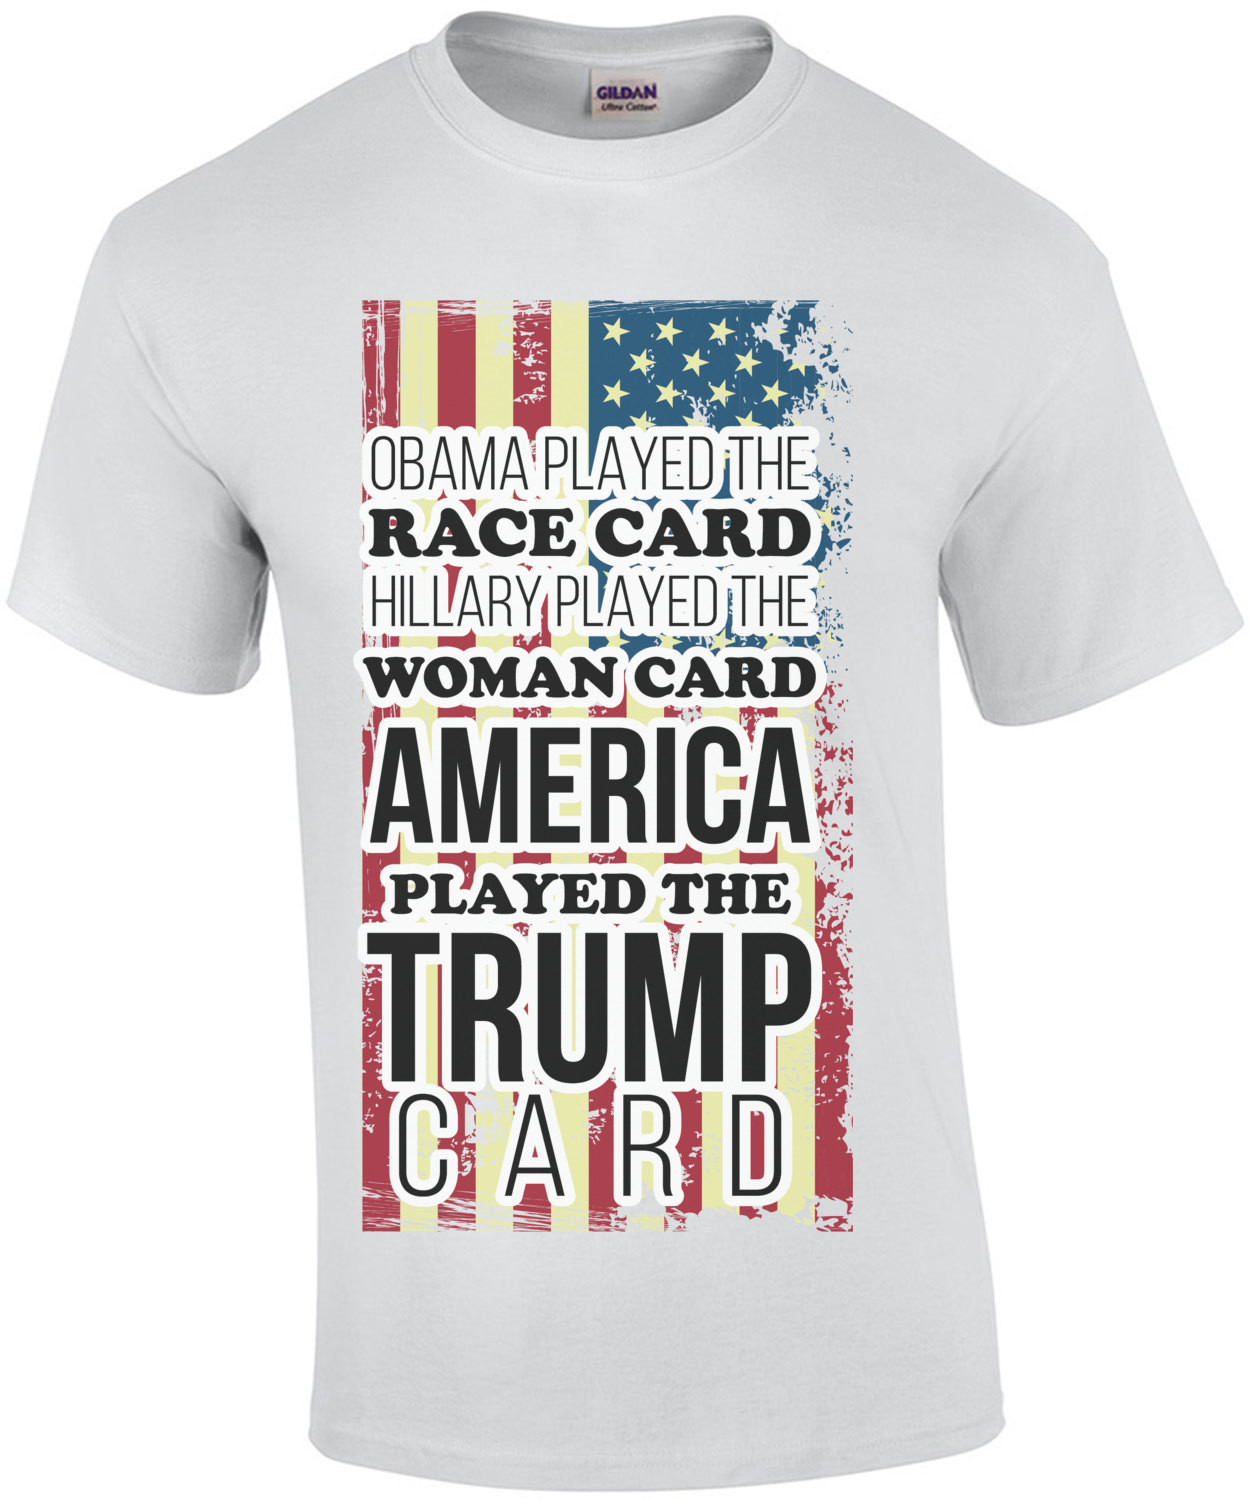 Obama played the race card. Hillary played the woman card. America played the trump card. Trump T-Shirt